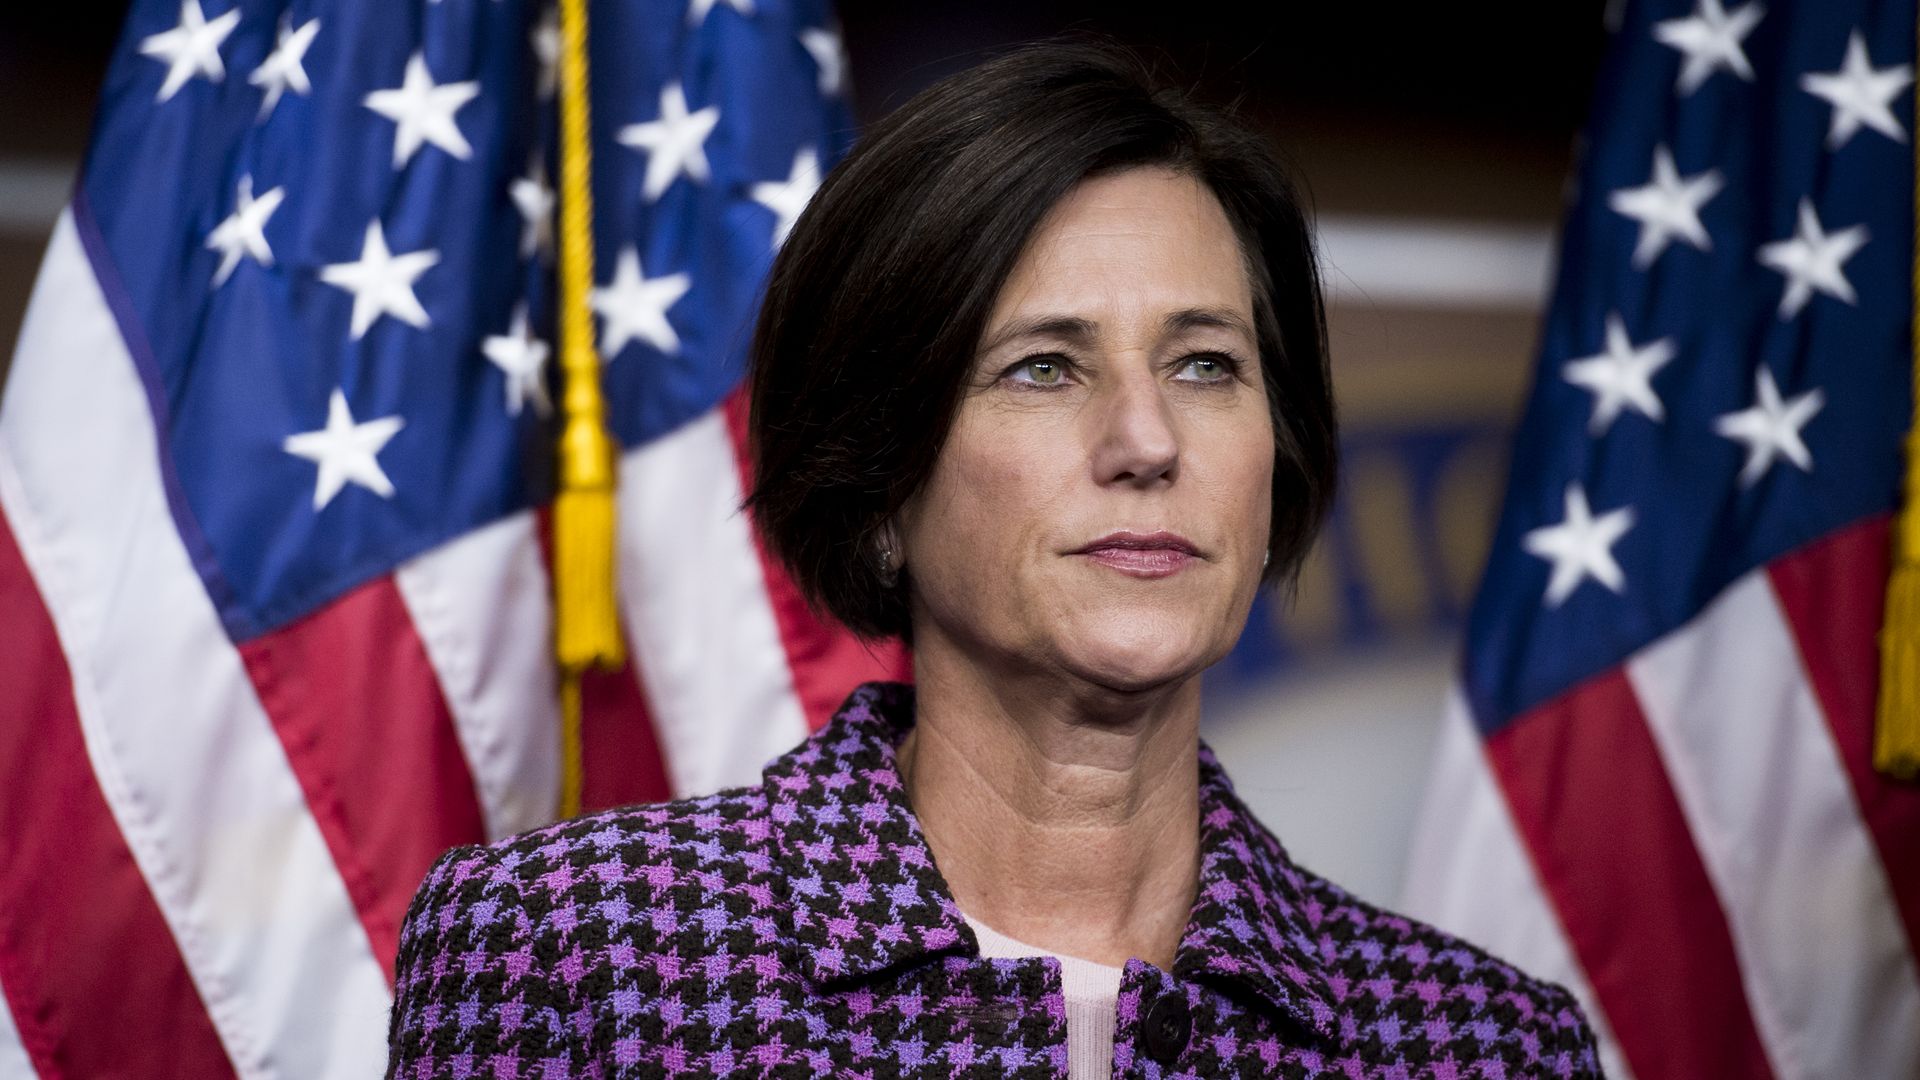 Mimi Walters in a purple plaid jacket standing in front of two American flags